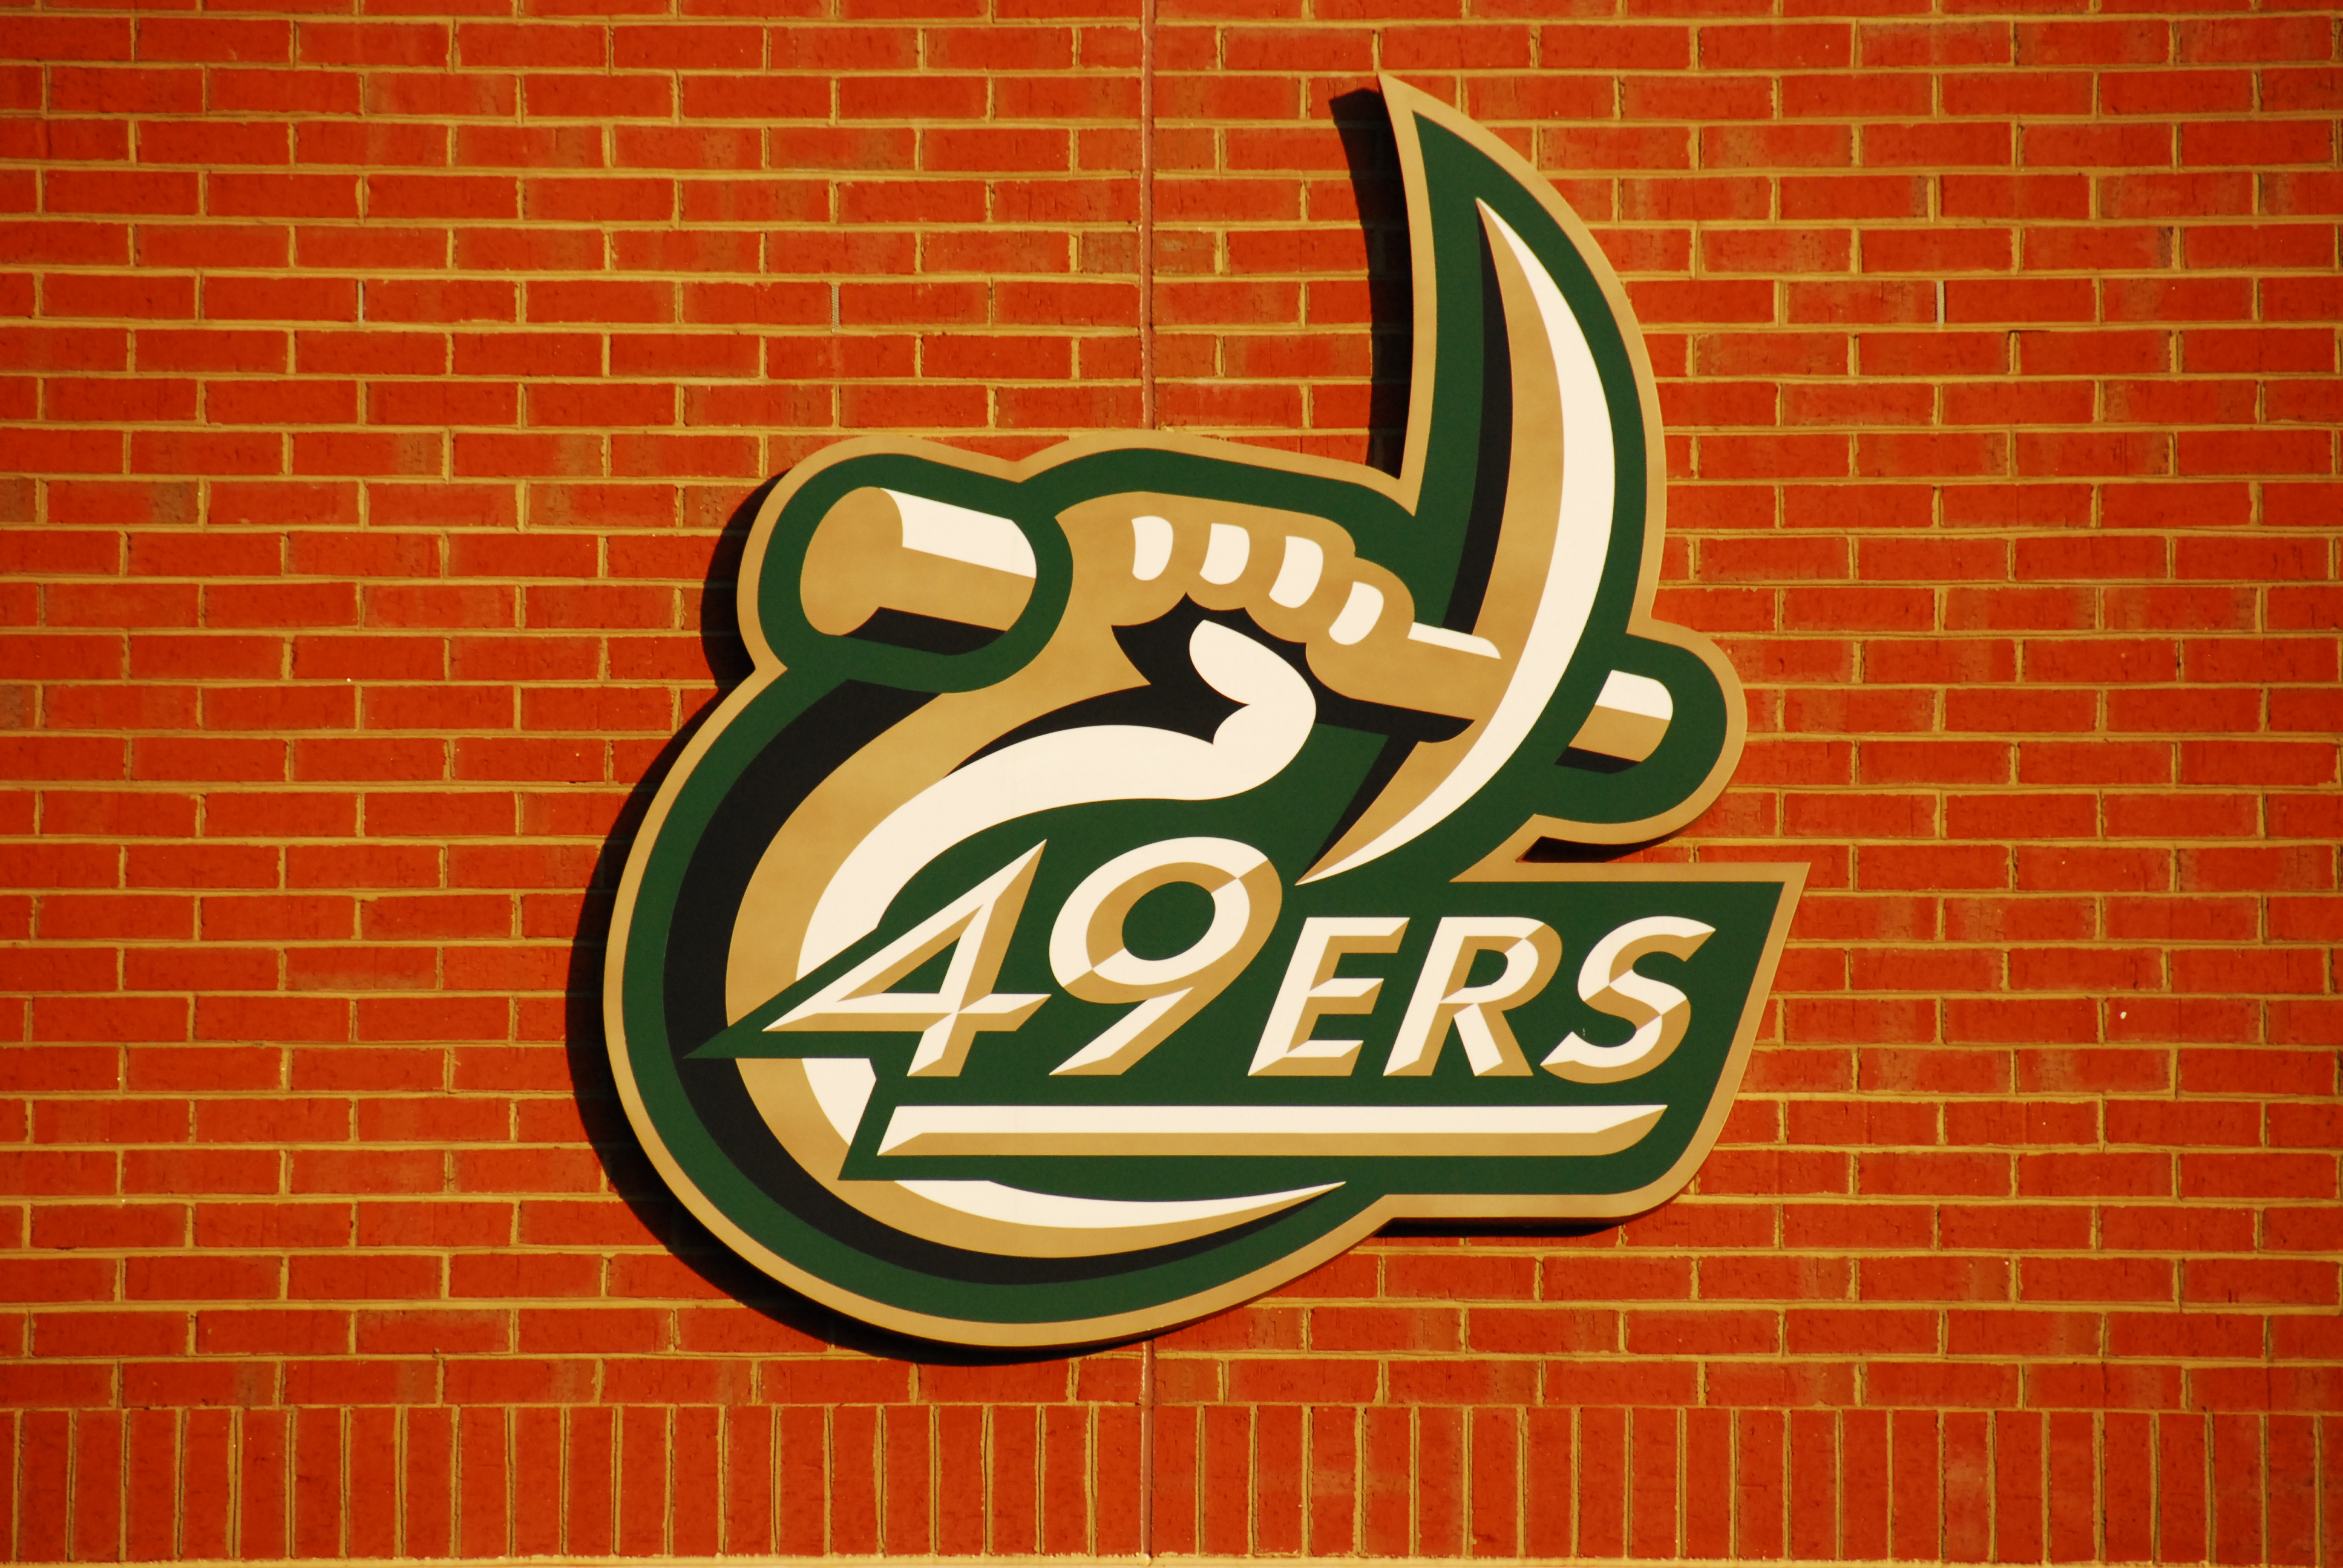 13 Things You Know If You Attended Unc Charlotte - Charlotte 49ers - HD Wallpaper 